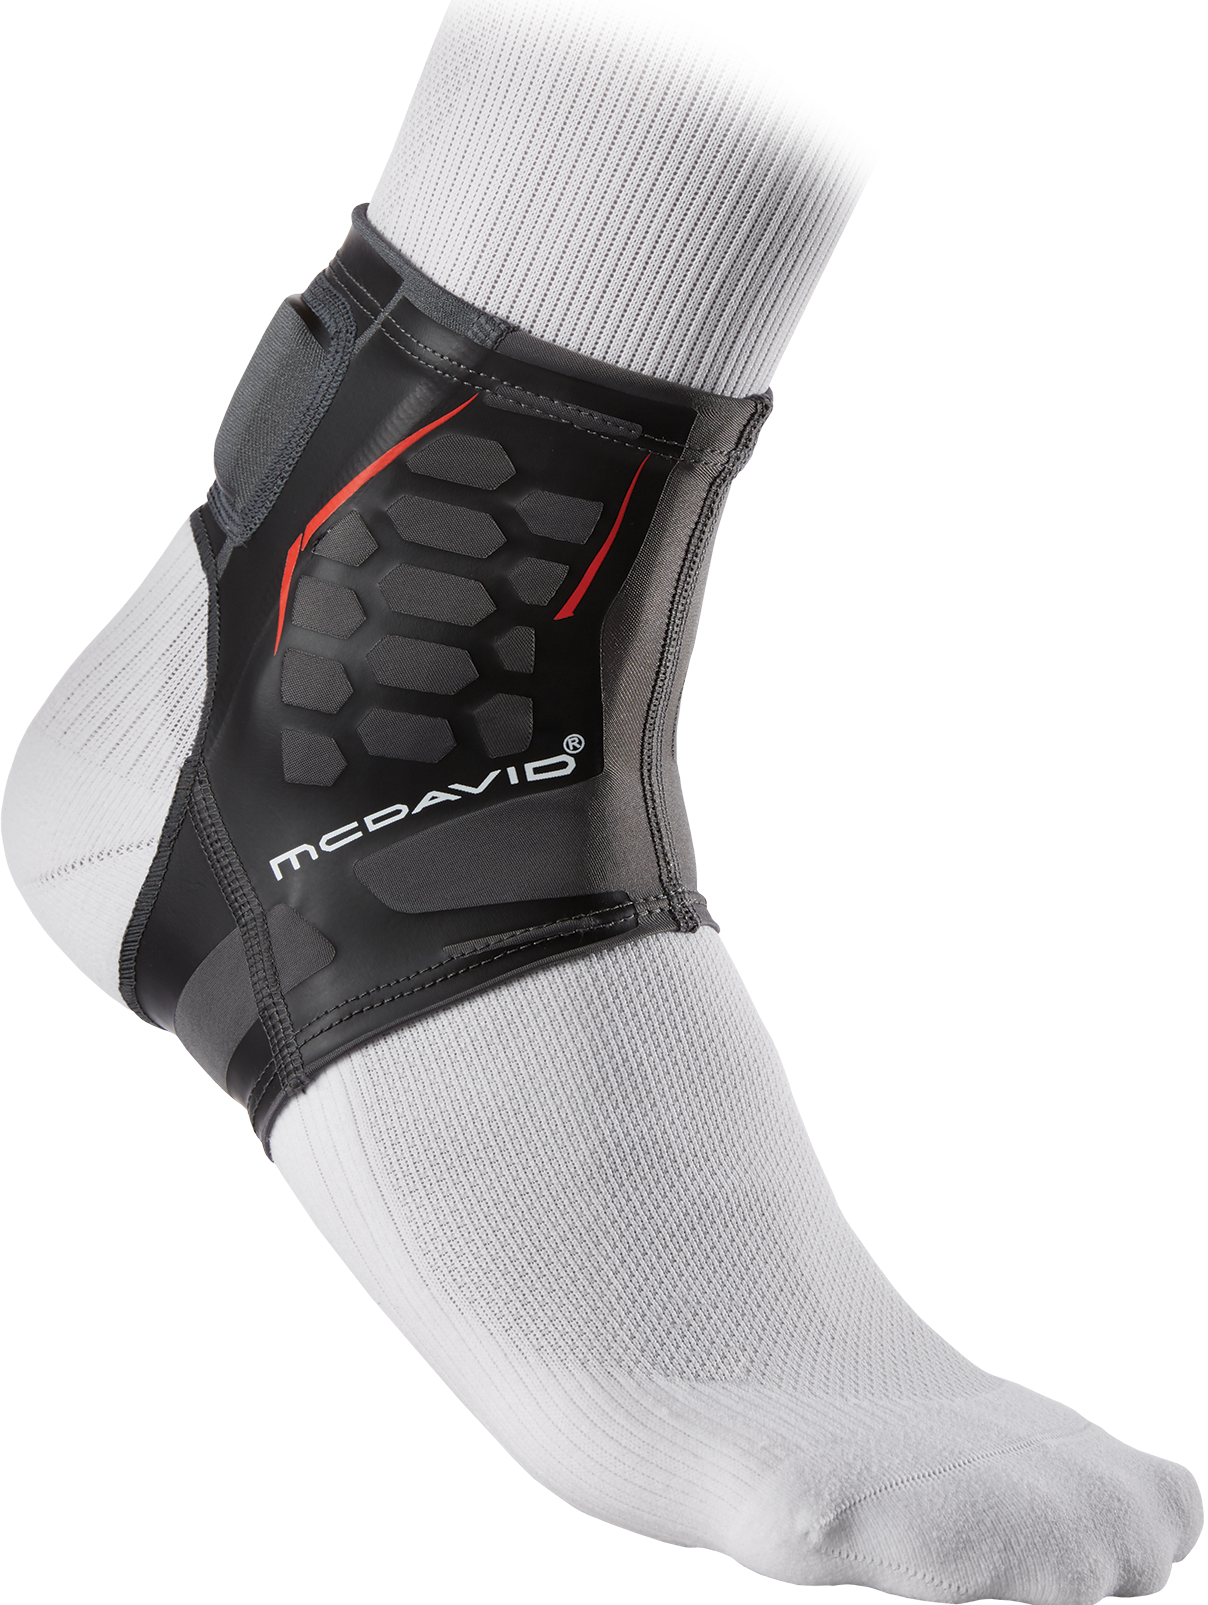 McDavid 4100 Runners Therapy achillespees-brace